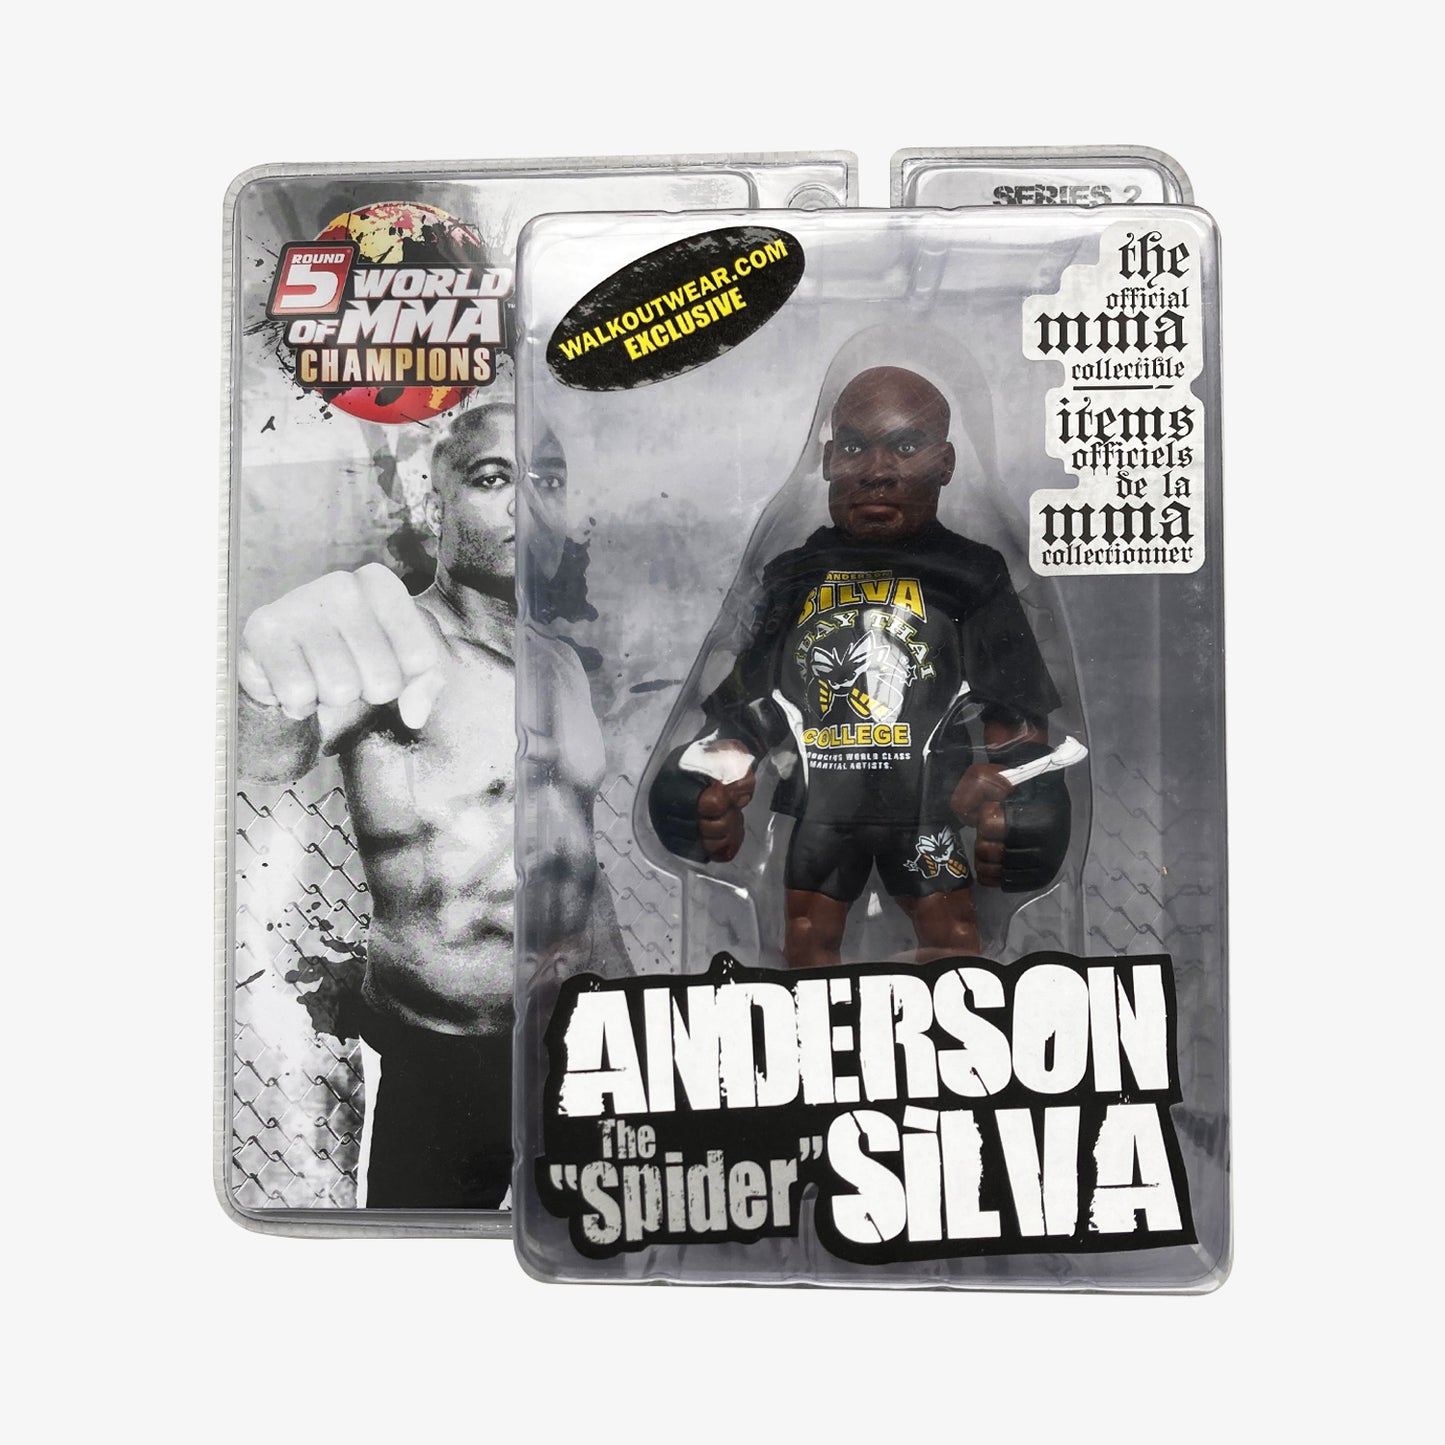 Round 5 WOMMA Series 2 - Anderson Silva (Walkout Wear Exclusive)